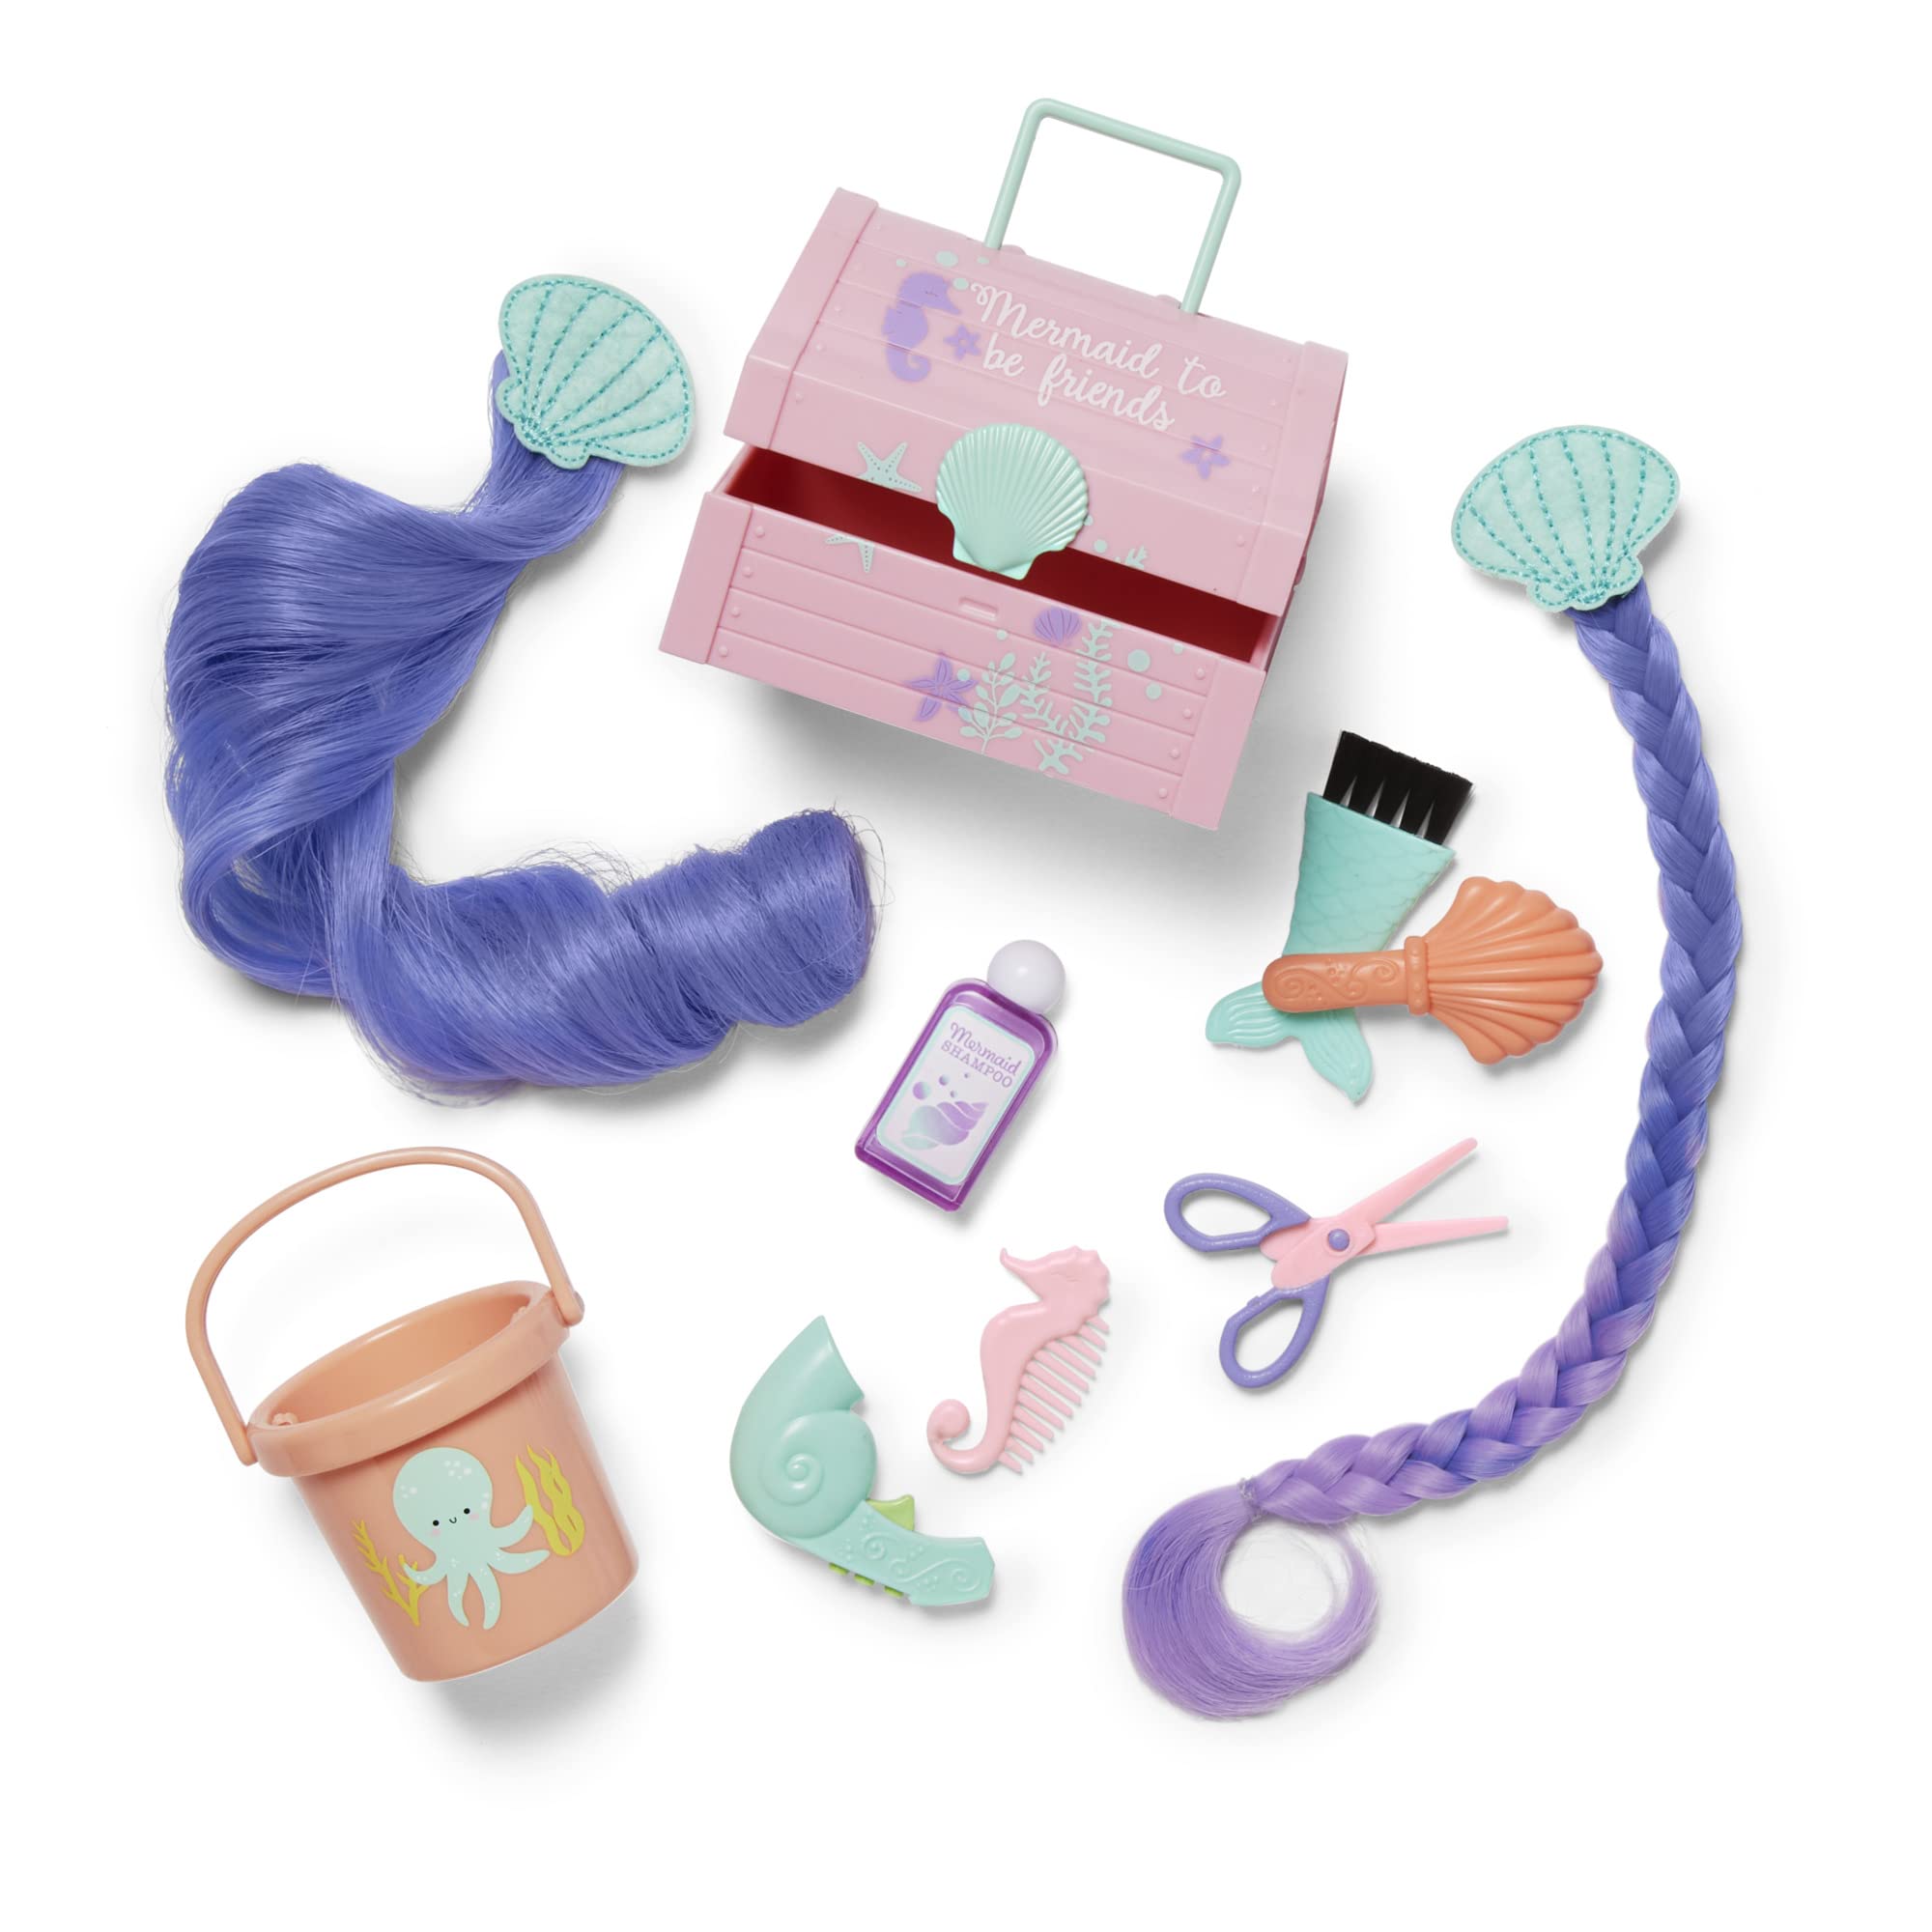 American Girl WellieWishers Seashell Salon Set for 14.5-Inch Dolls with a Purple and Pink Shell-Shaped Salon Chair, Two 10-Inch Clip-on Hair Extensions, and Pink Treasure Chest for Ages 4+